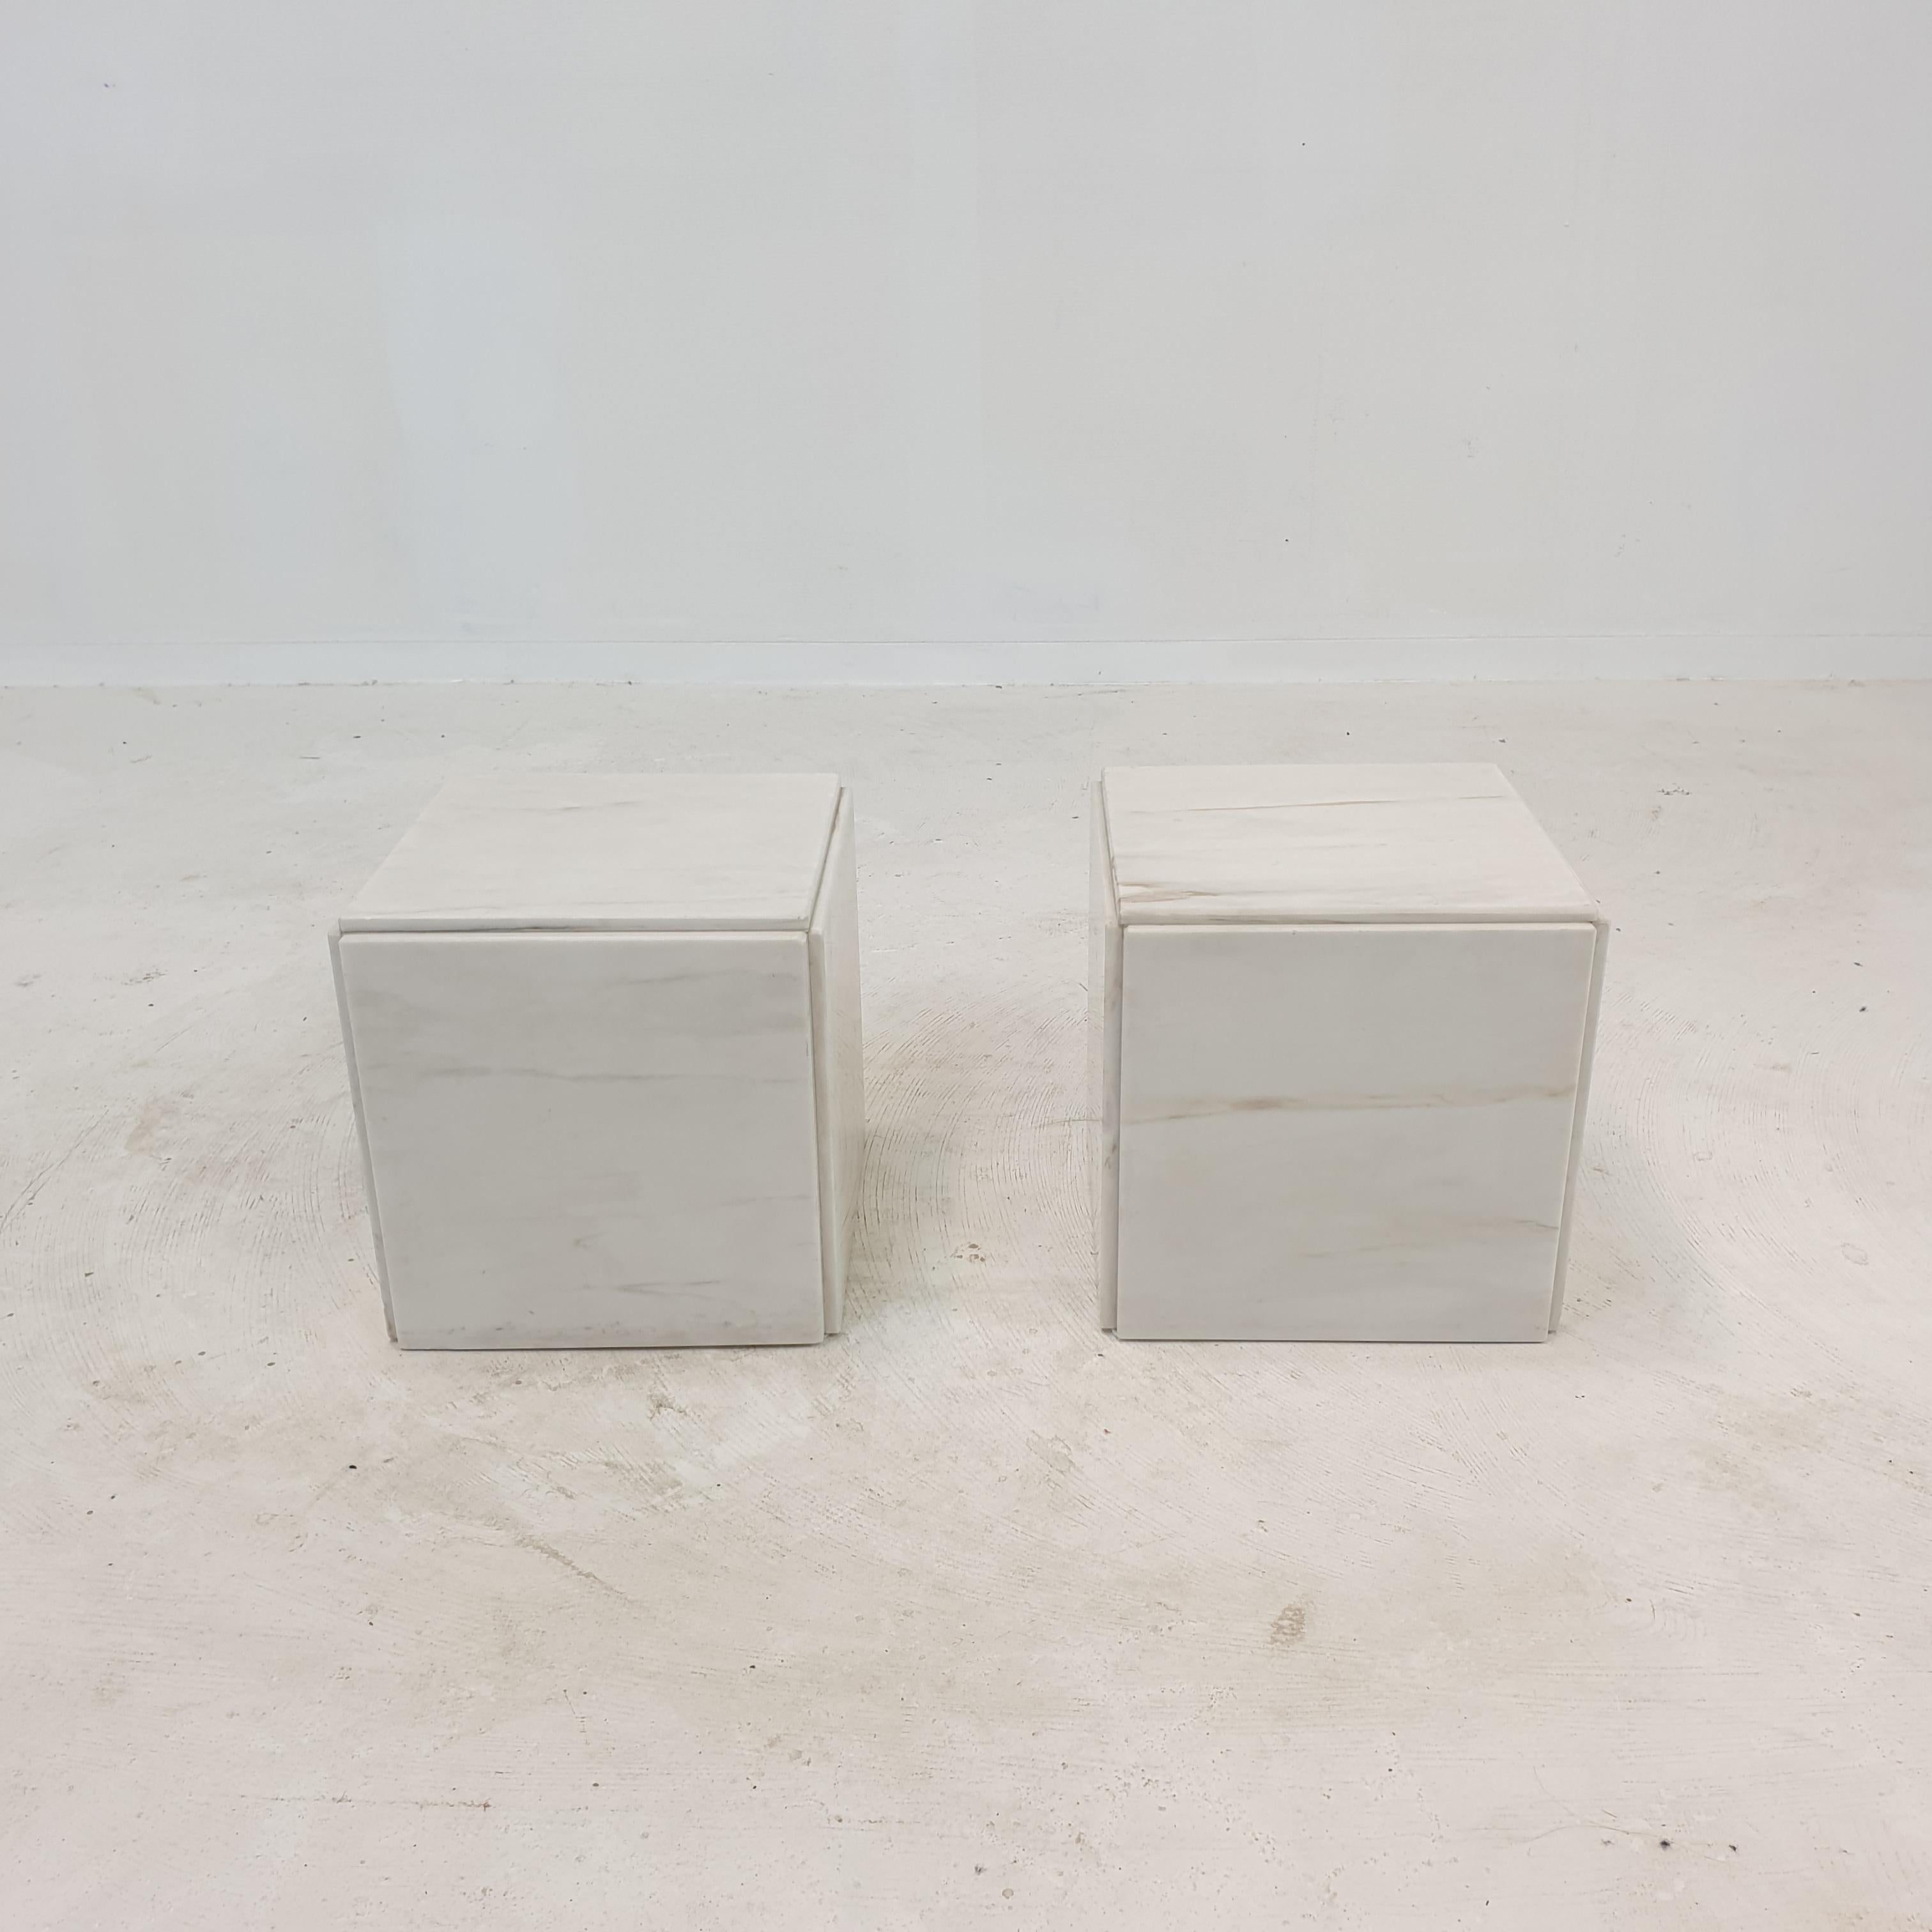 Very nice set of 2 Italian side tables or pedestals, fabricated in the early 80's.

They are handcrafted out of beautiful Carrara Marble.

They have the normal traces of use, see the pictures. 

We work with professional packers and shippers,